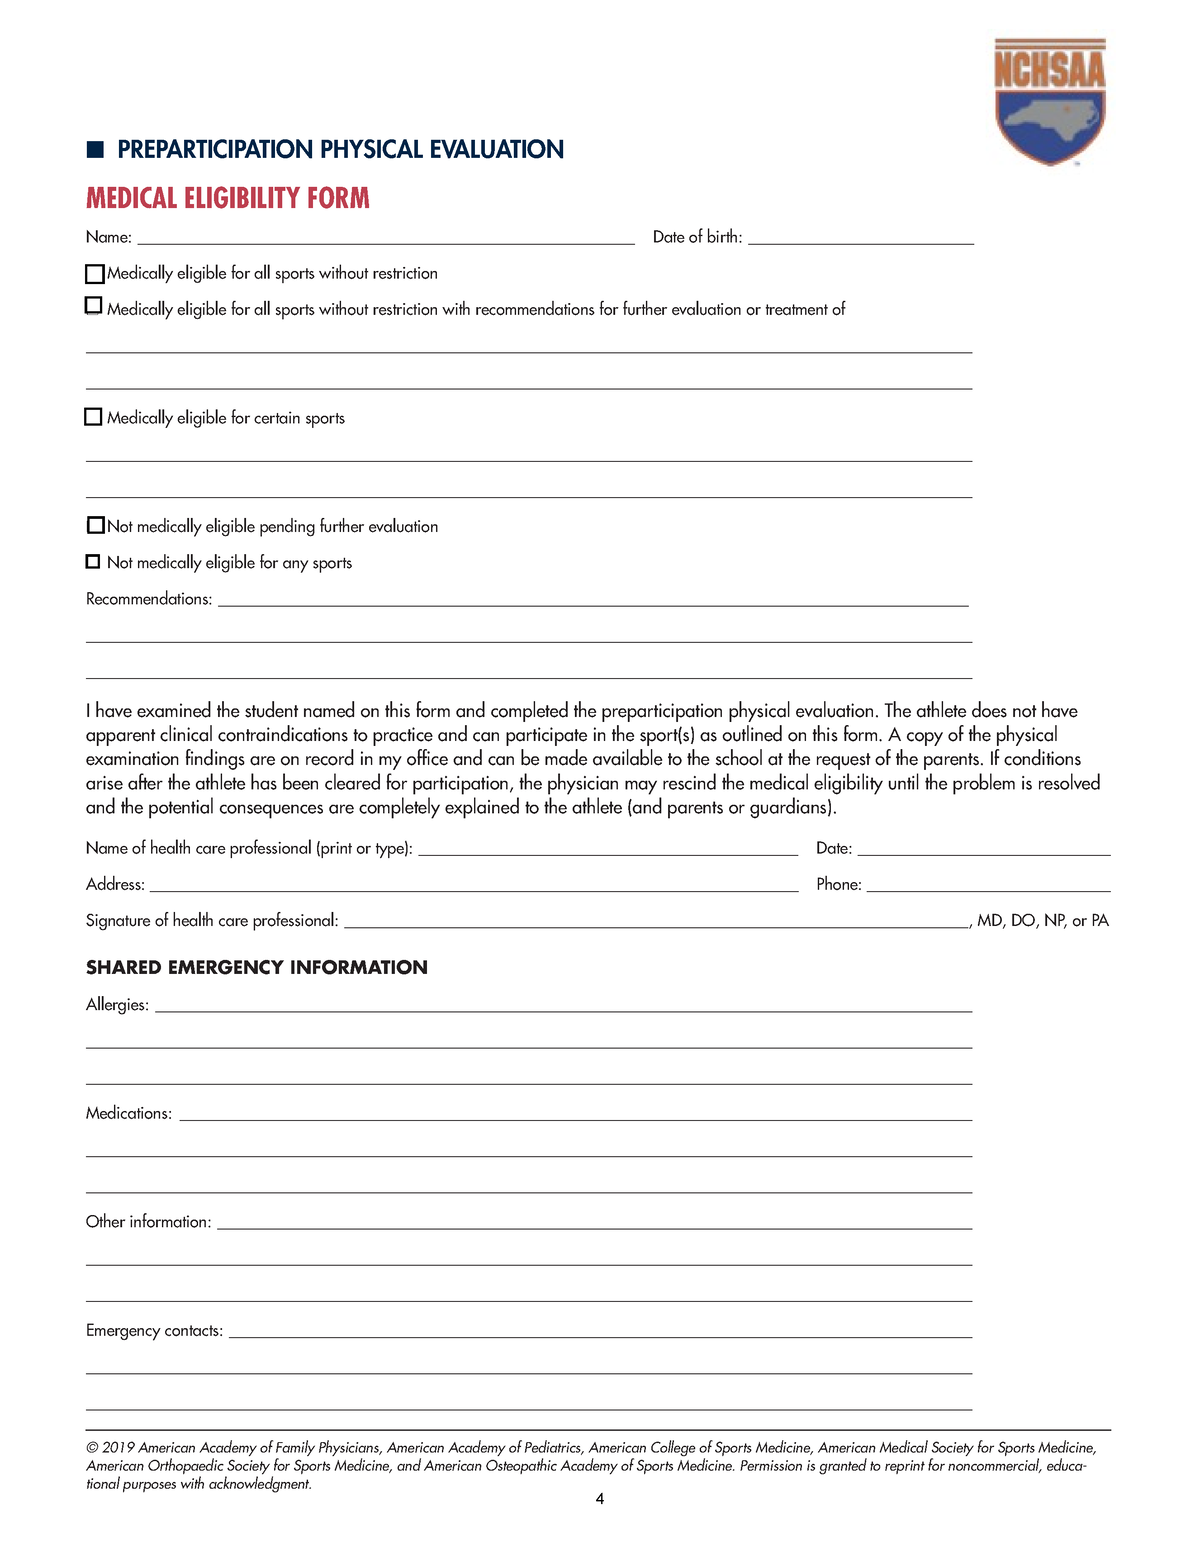 Ppe Medical Eligibility Form